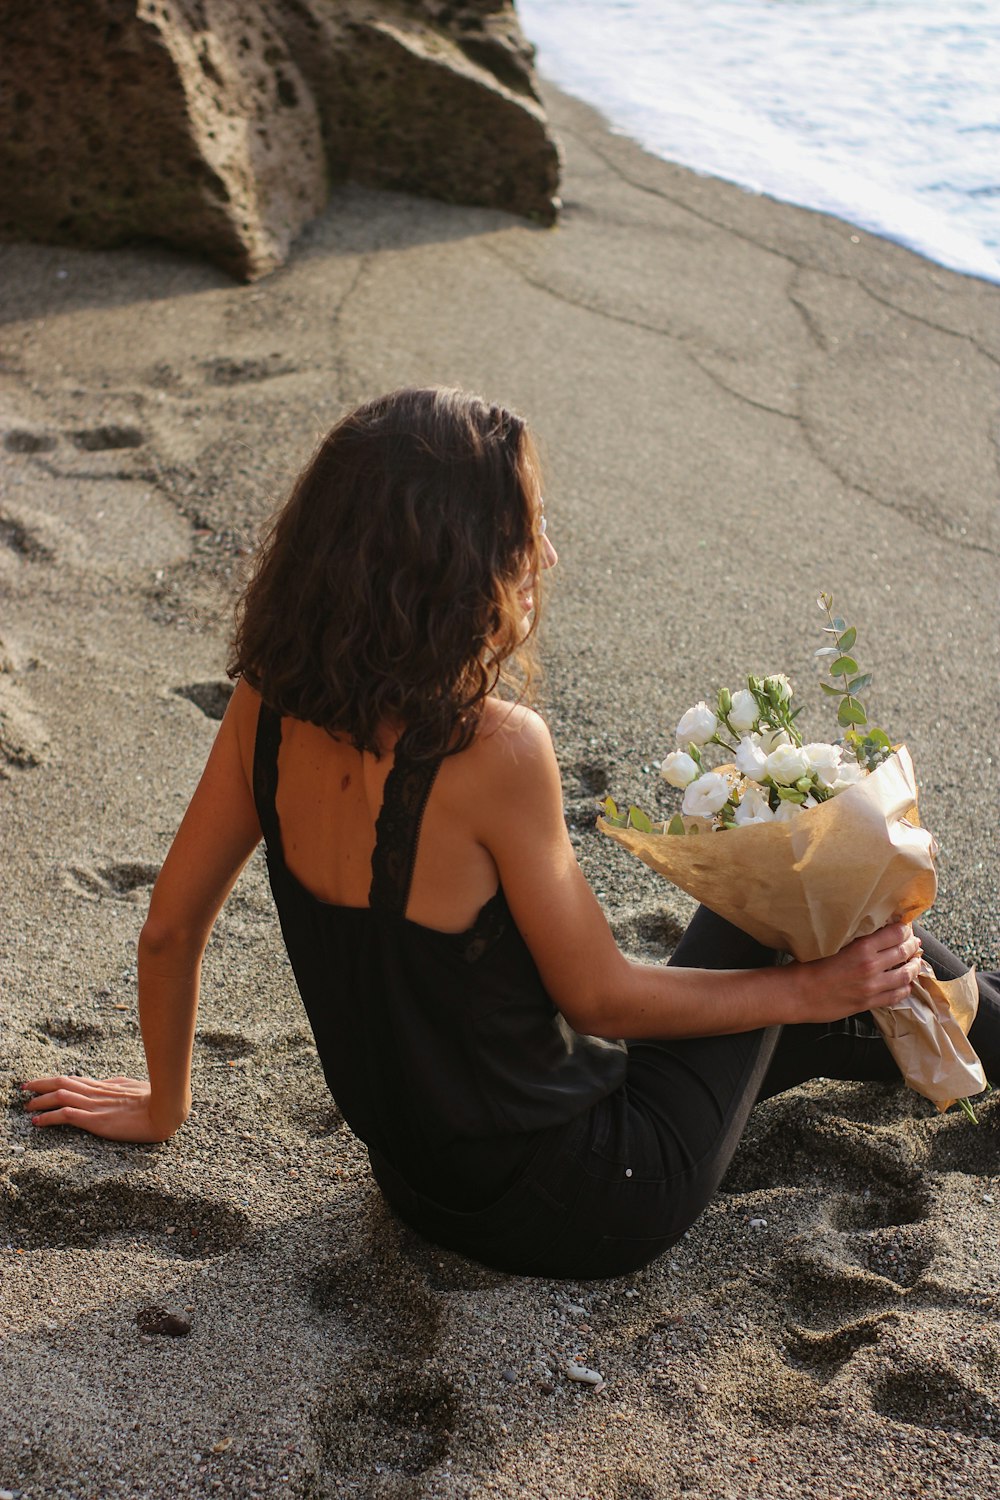 a woman sitting on a beach holding a bouquet of flowers